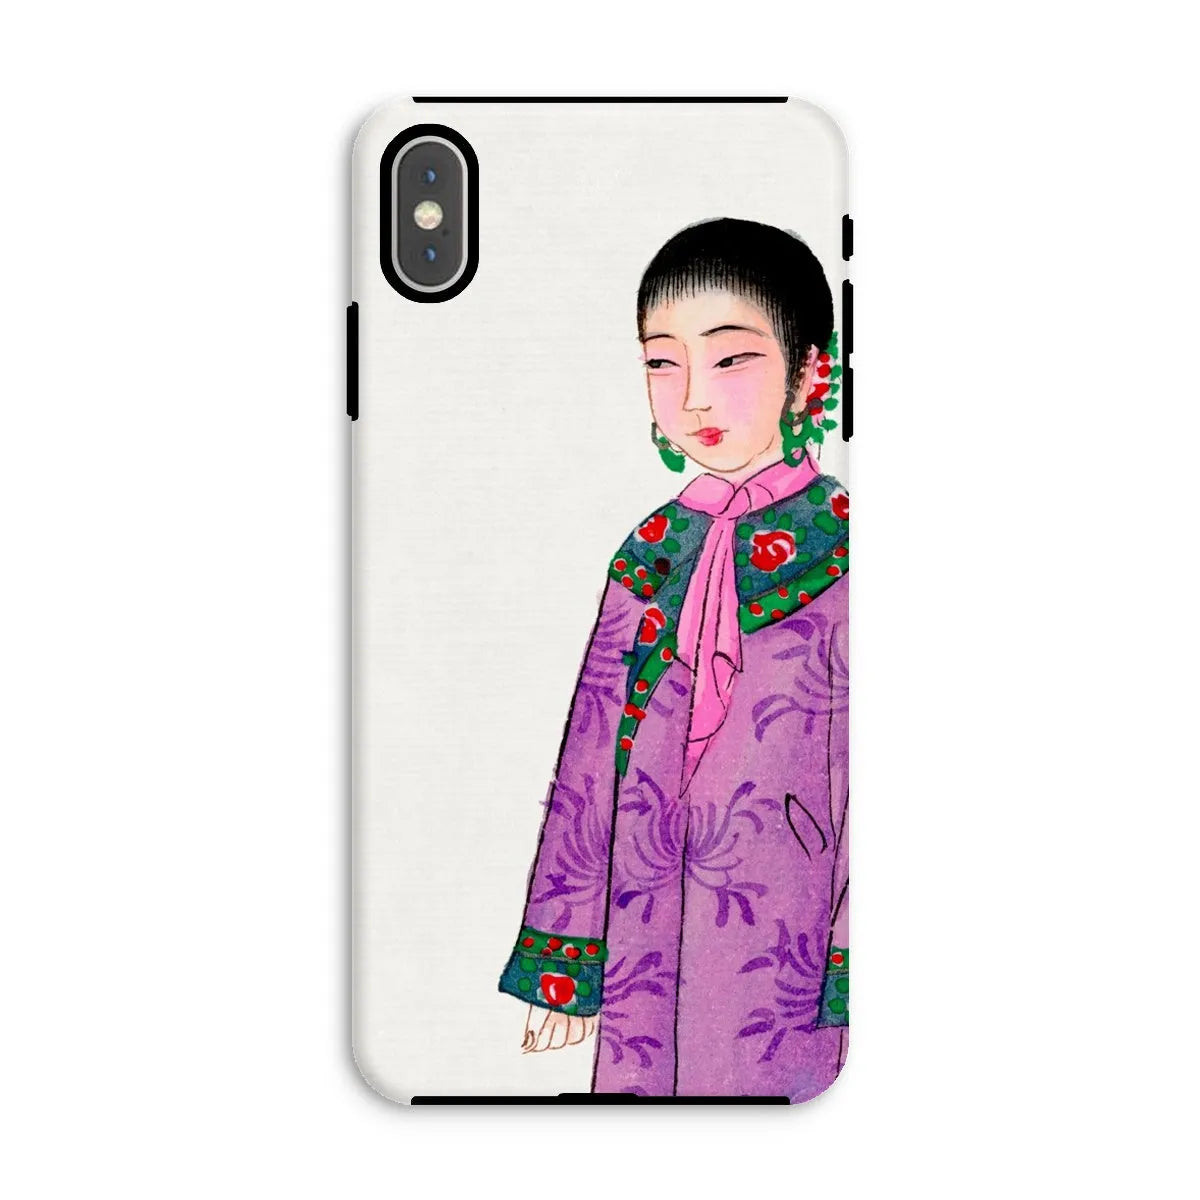 Manchu Noblewoman - Chinese Aesthetic Art Phone Case - Iphone Xs Max / Matte - Mobile Phone Cases - Aesthetic Art